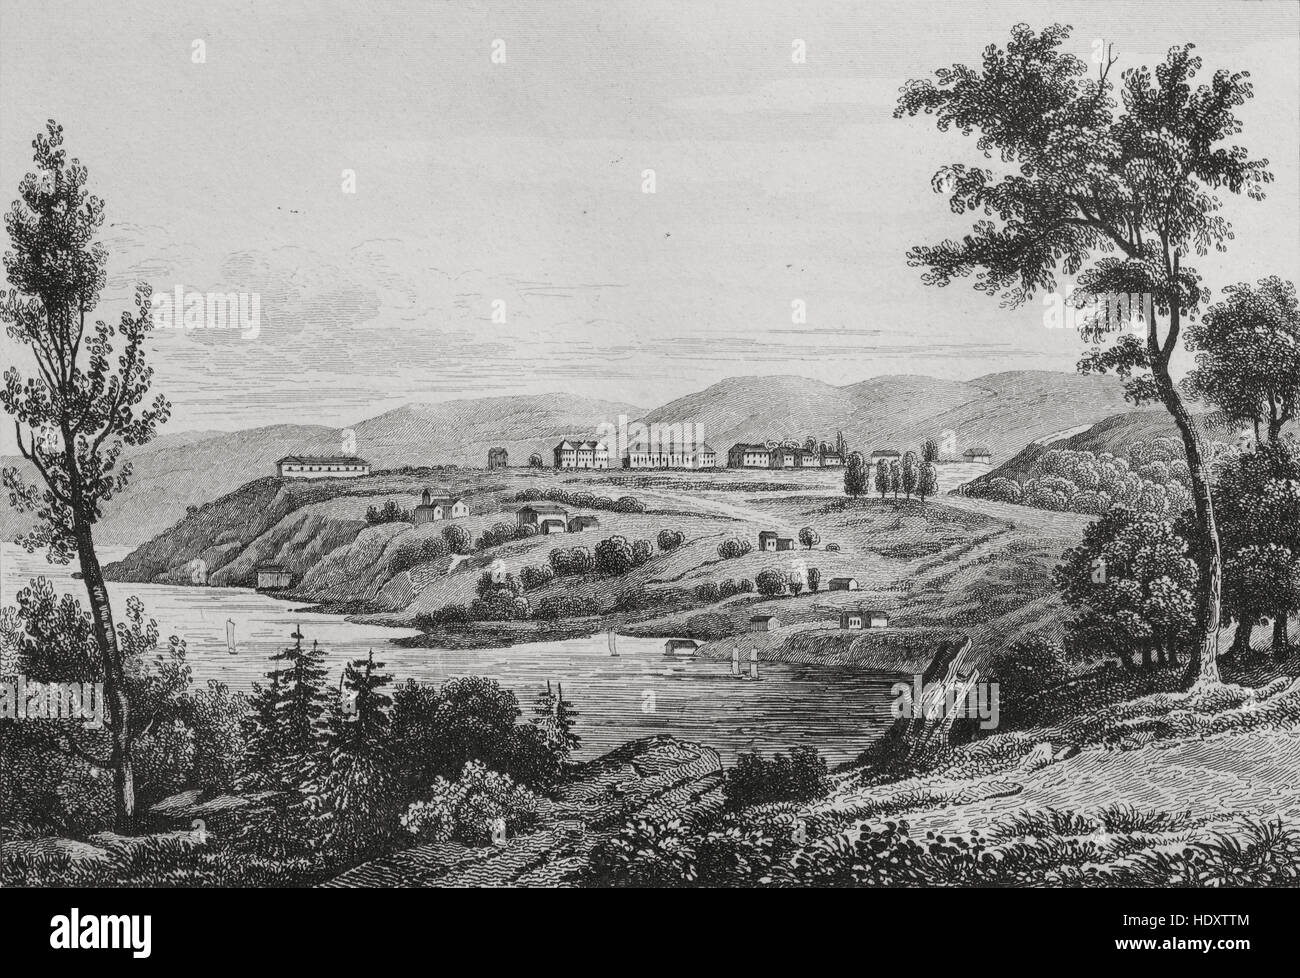 View of West Point, United States of America. 19th century steel engraving by Milbert, Lemaitre direxit and Desaulx. Stock Photo